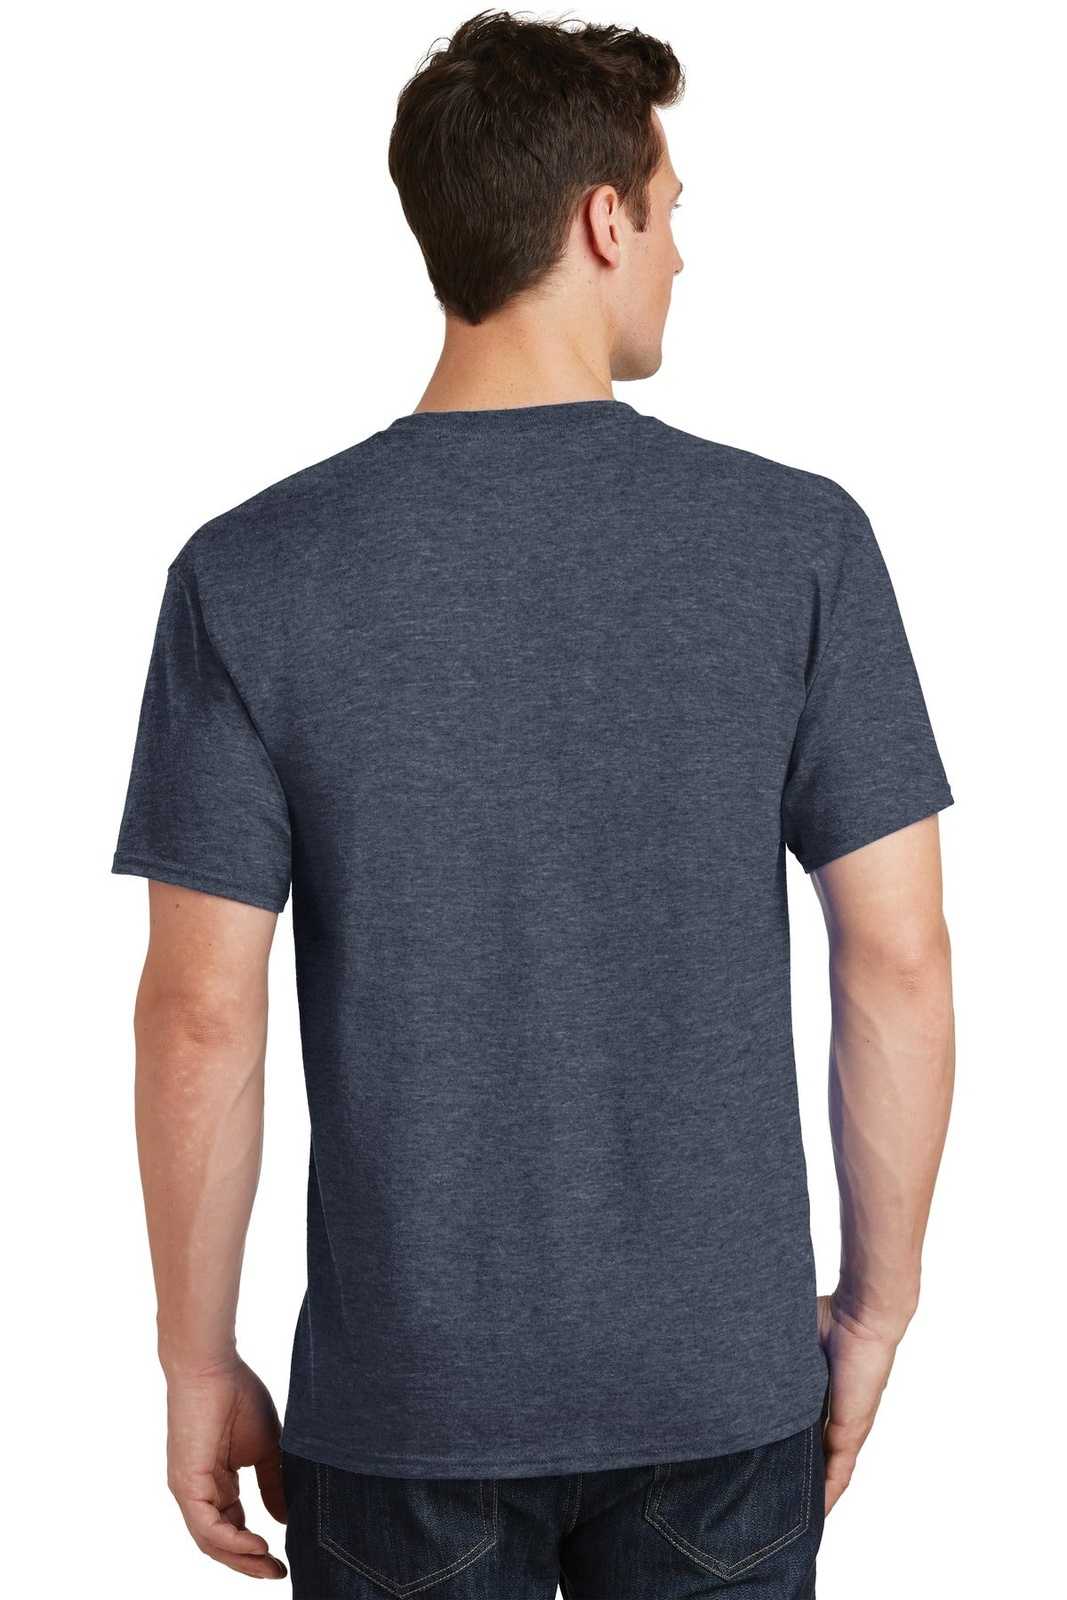 Port & Company PC54T Tall Core Cotton Tee - Heather Navy - HIT a Double - 1